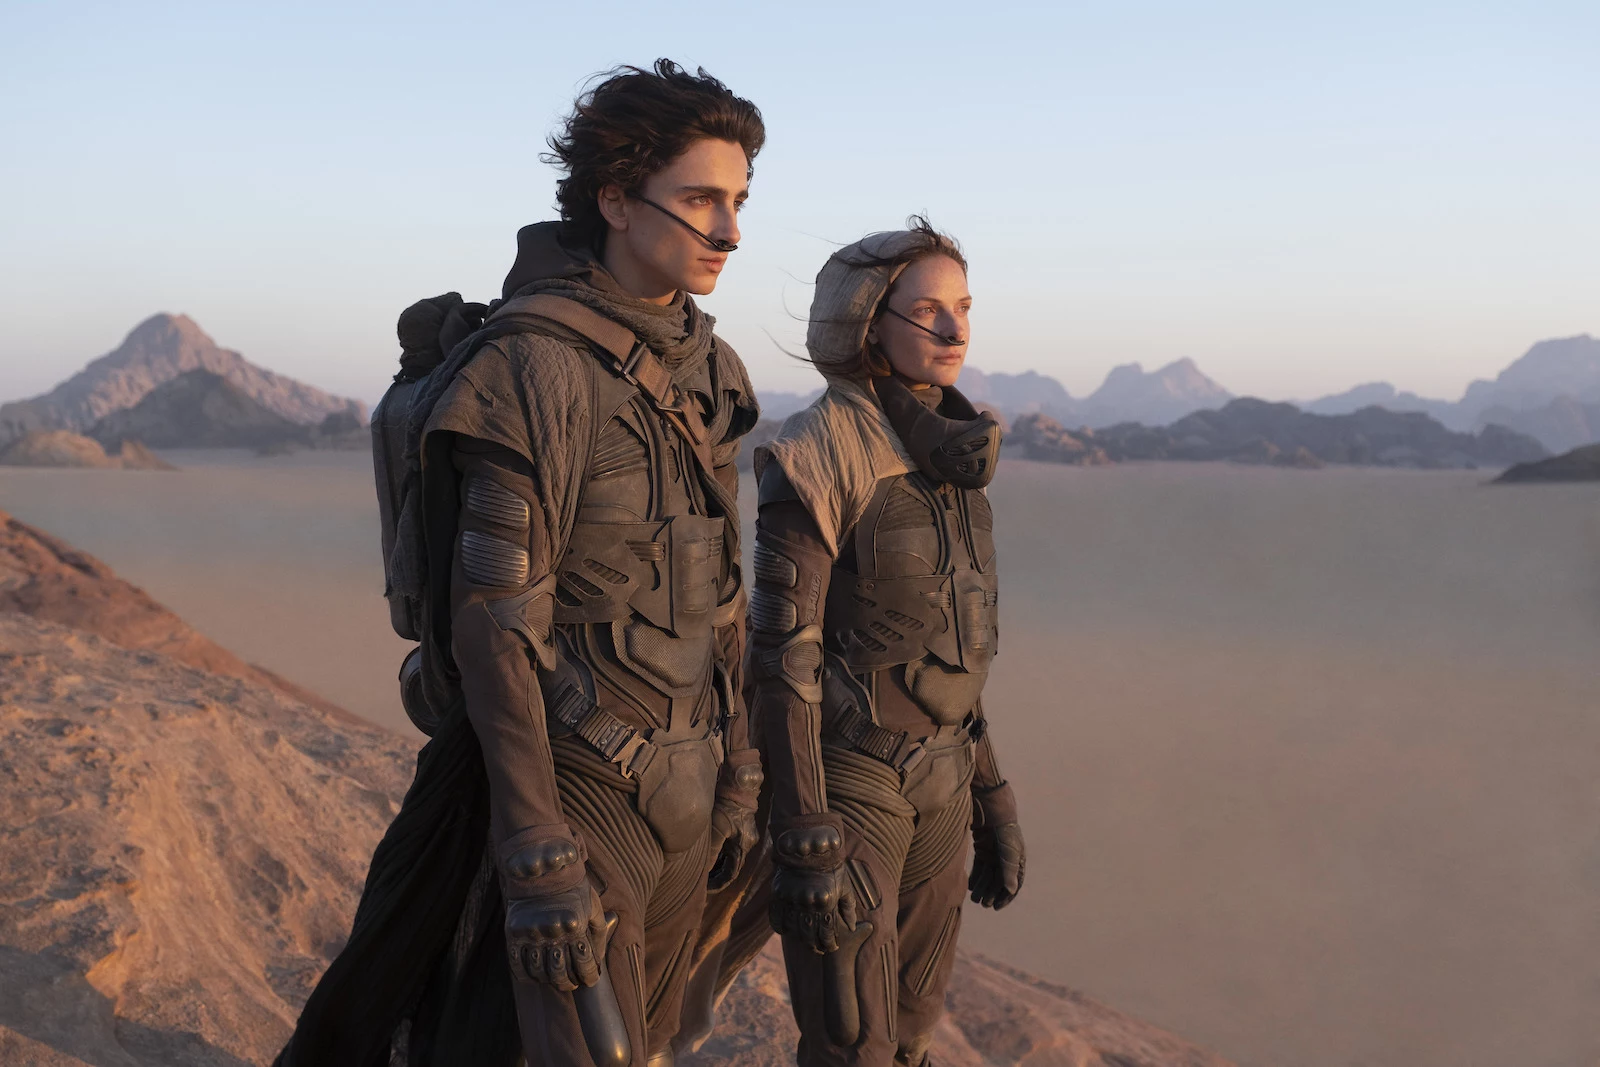 Would You Like to Own the Digital Movie Dune? image